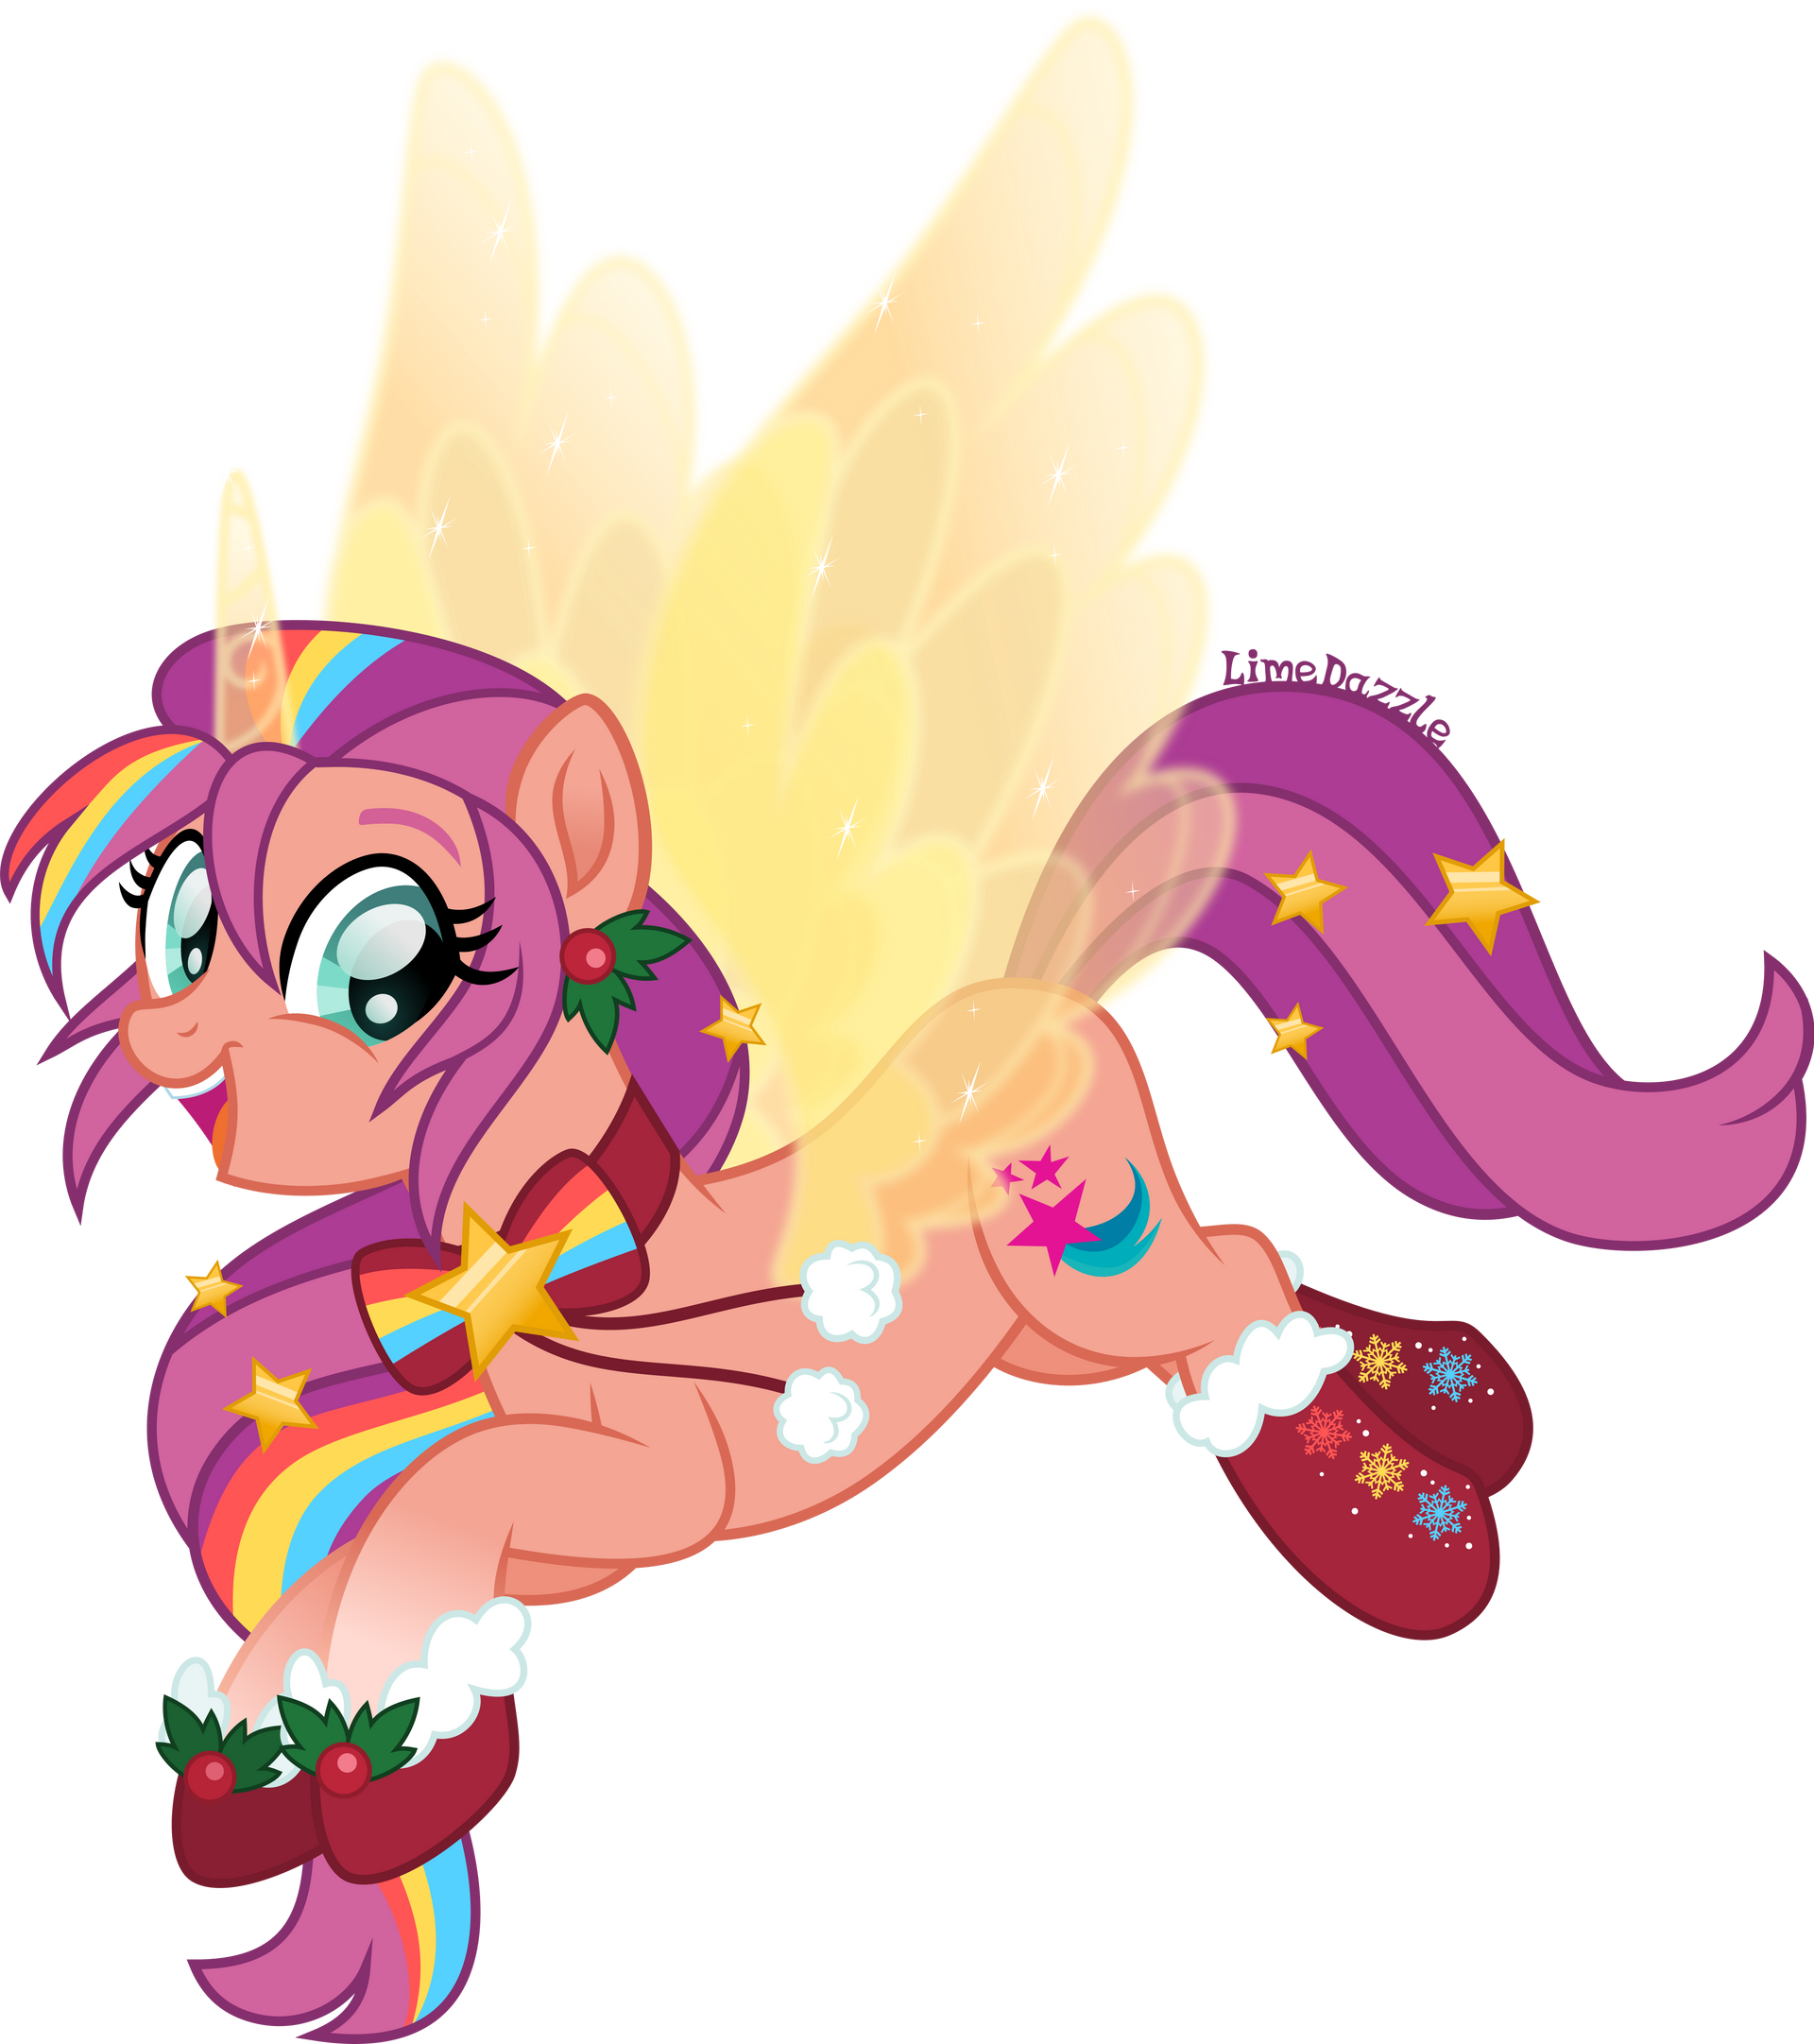 g5___holiday_sunny_by_limedazzle_dexdgp5-fullview.png